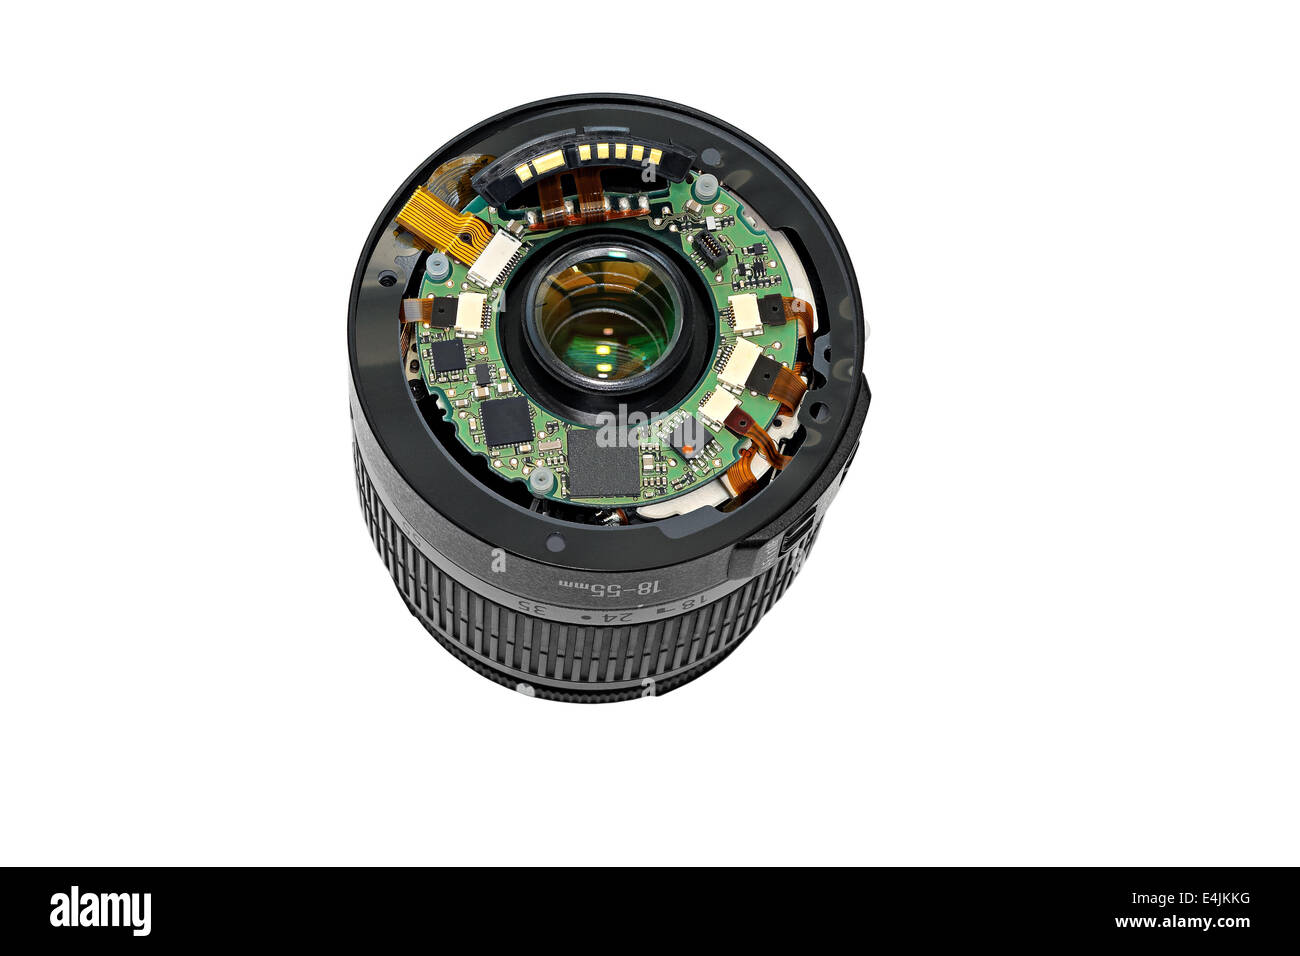 lens, disassembled, photo, isolated, digital, part, electronic, device, focus, detail, inside, repair, optical, screw, complex, Stock Photo